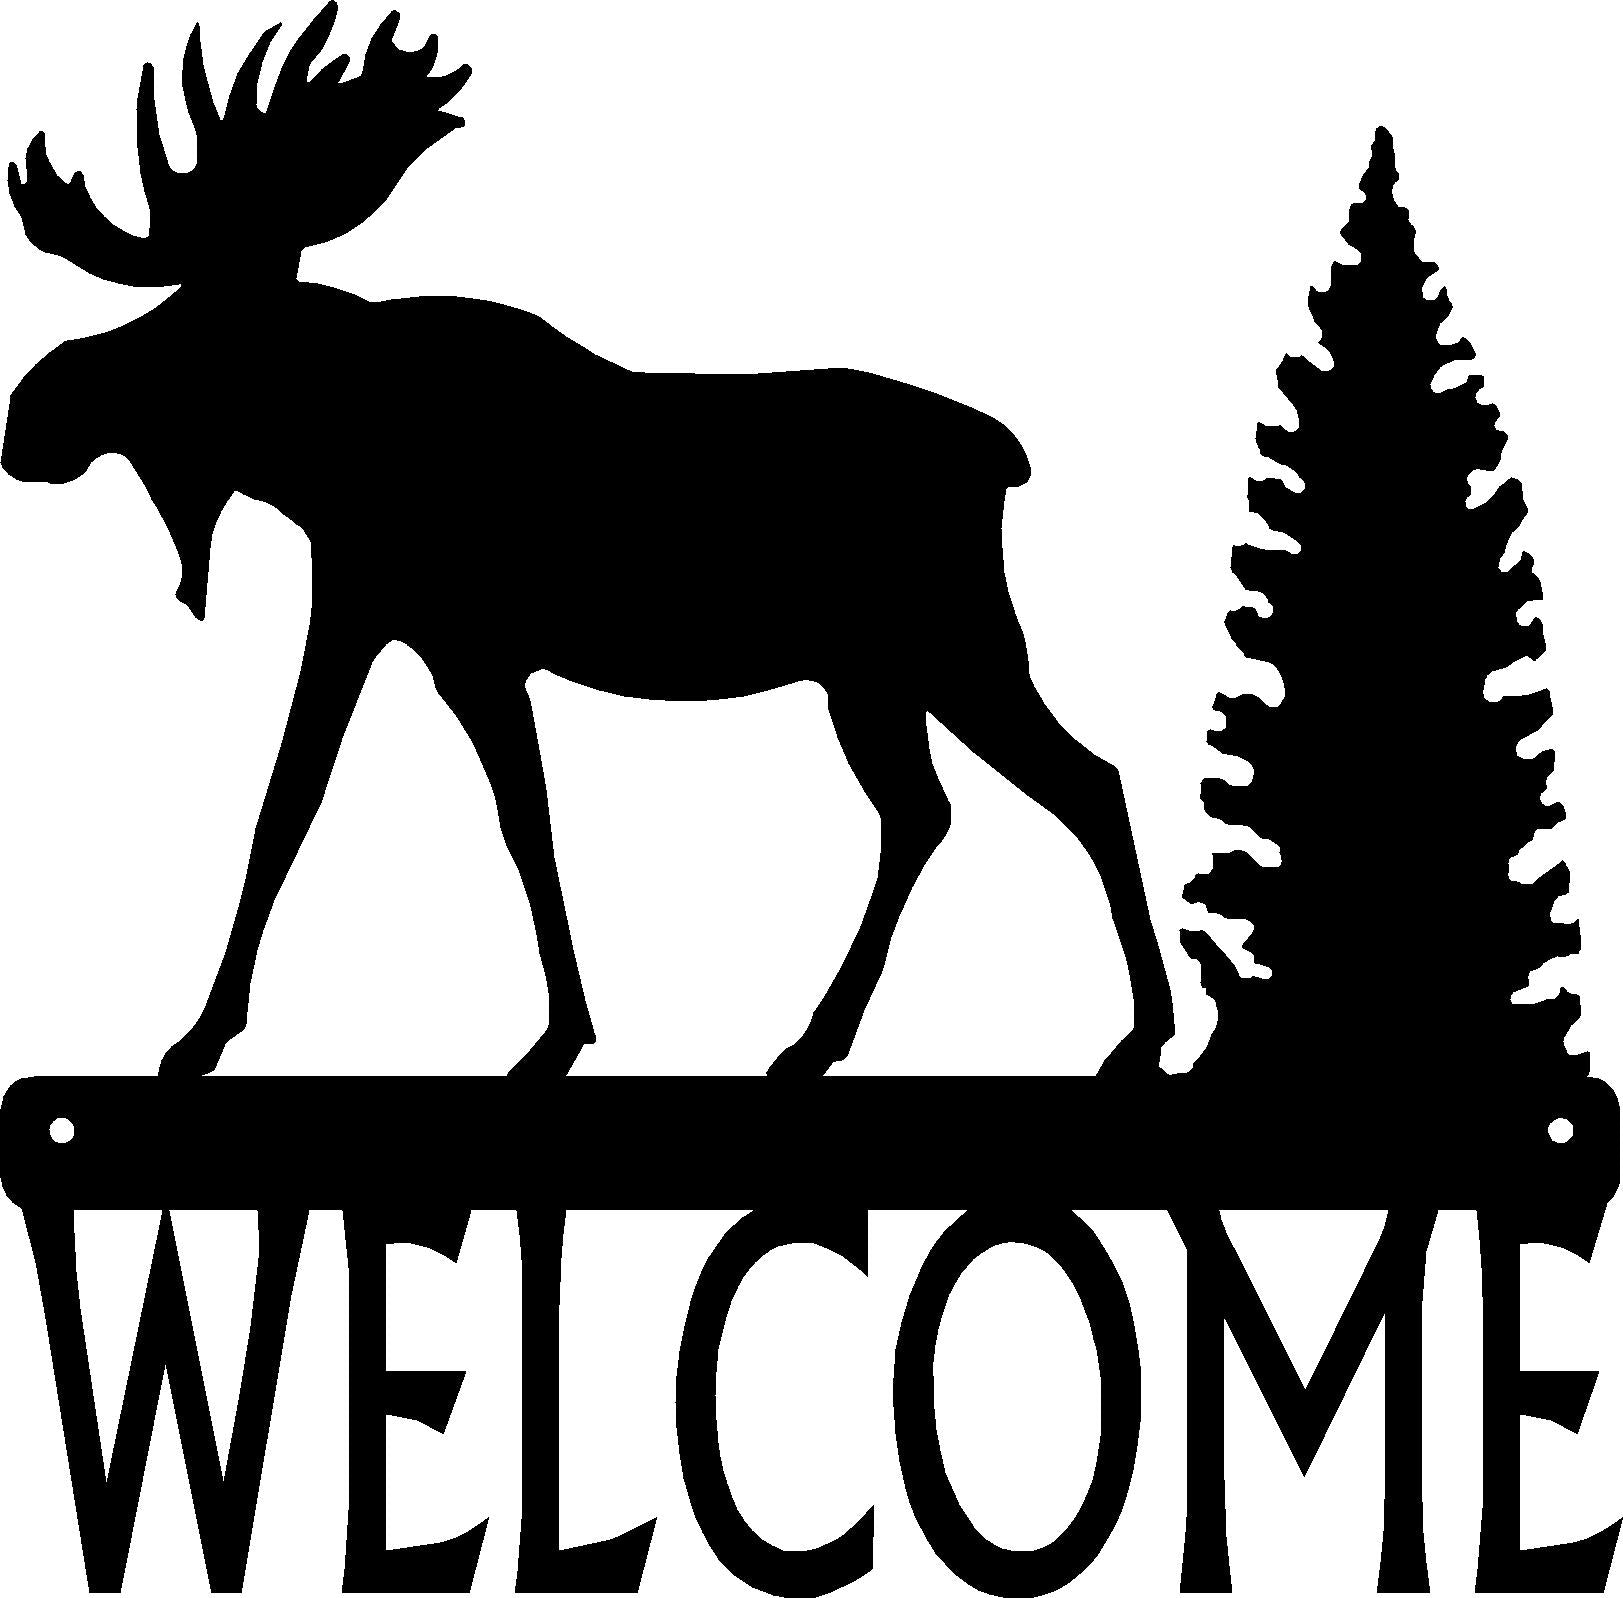 Moose Welcome Sign - The Metal Peddler Welcome Signs Moose, porch, welcome sign